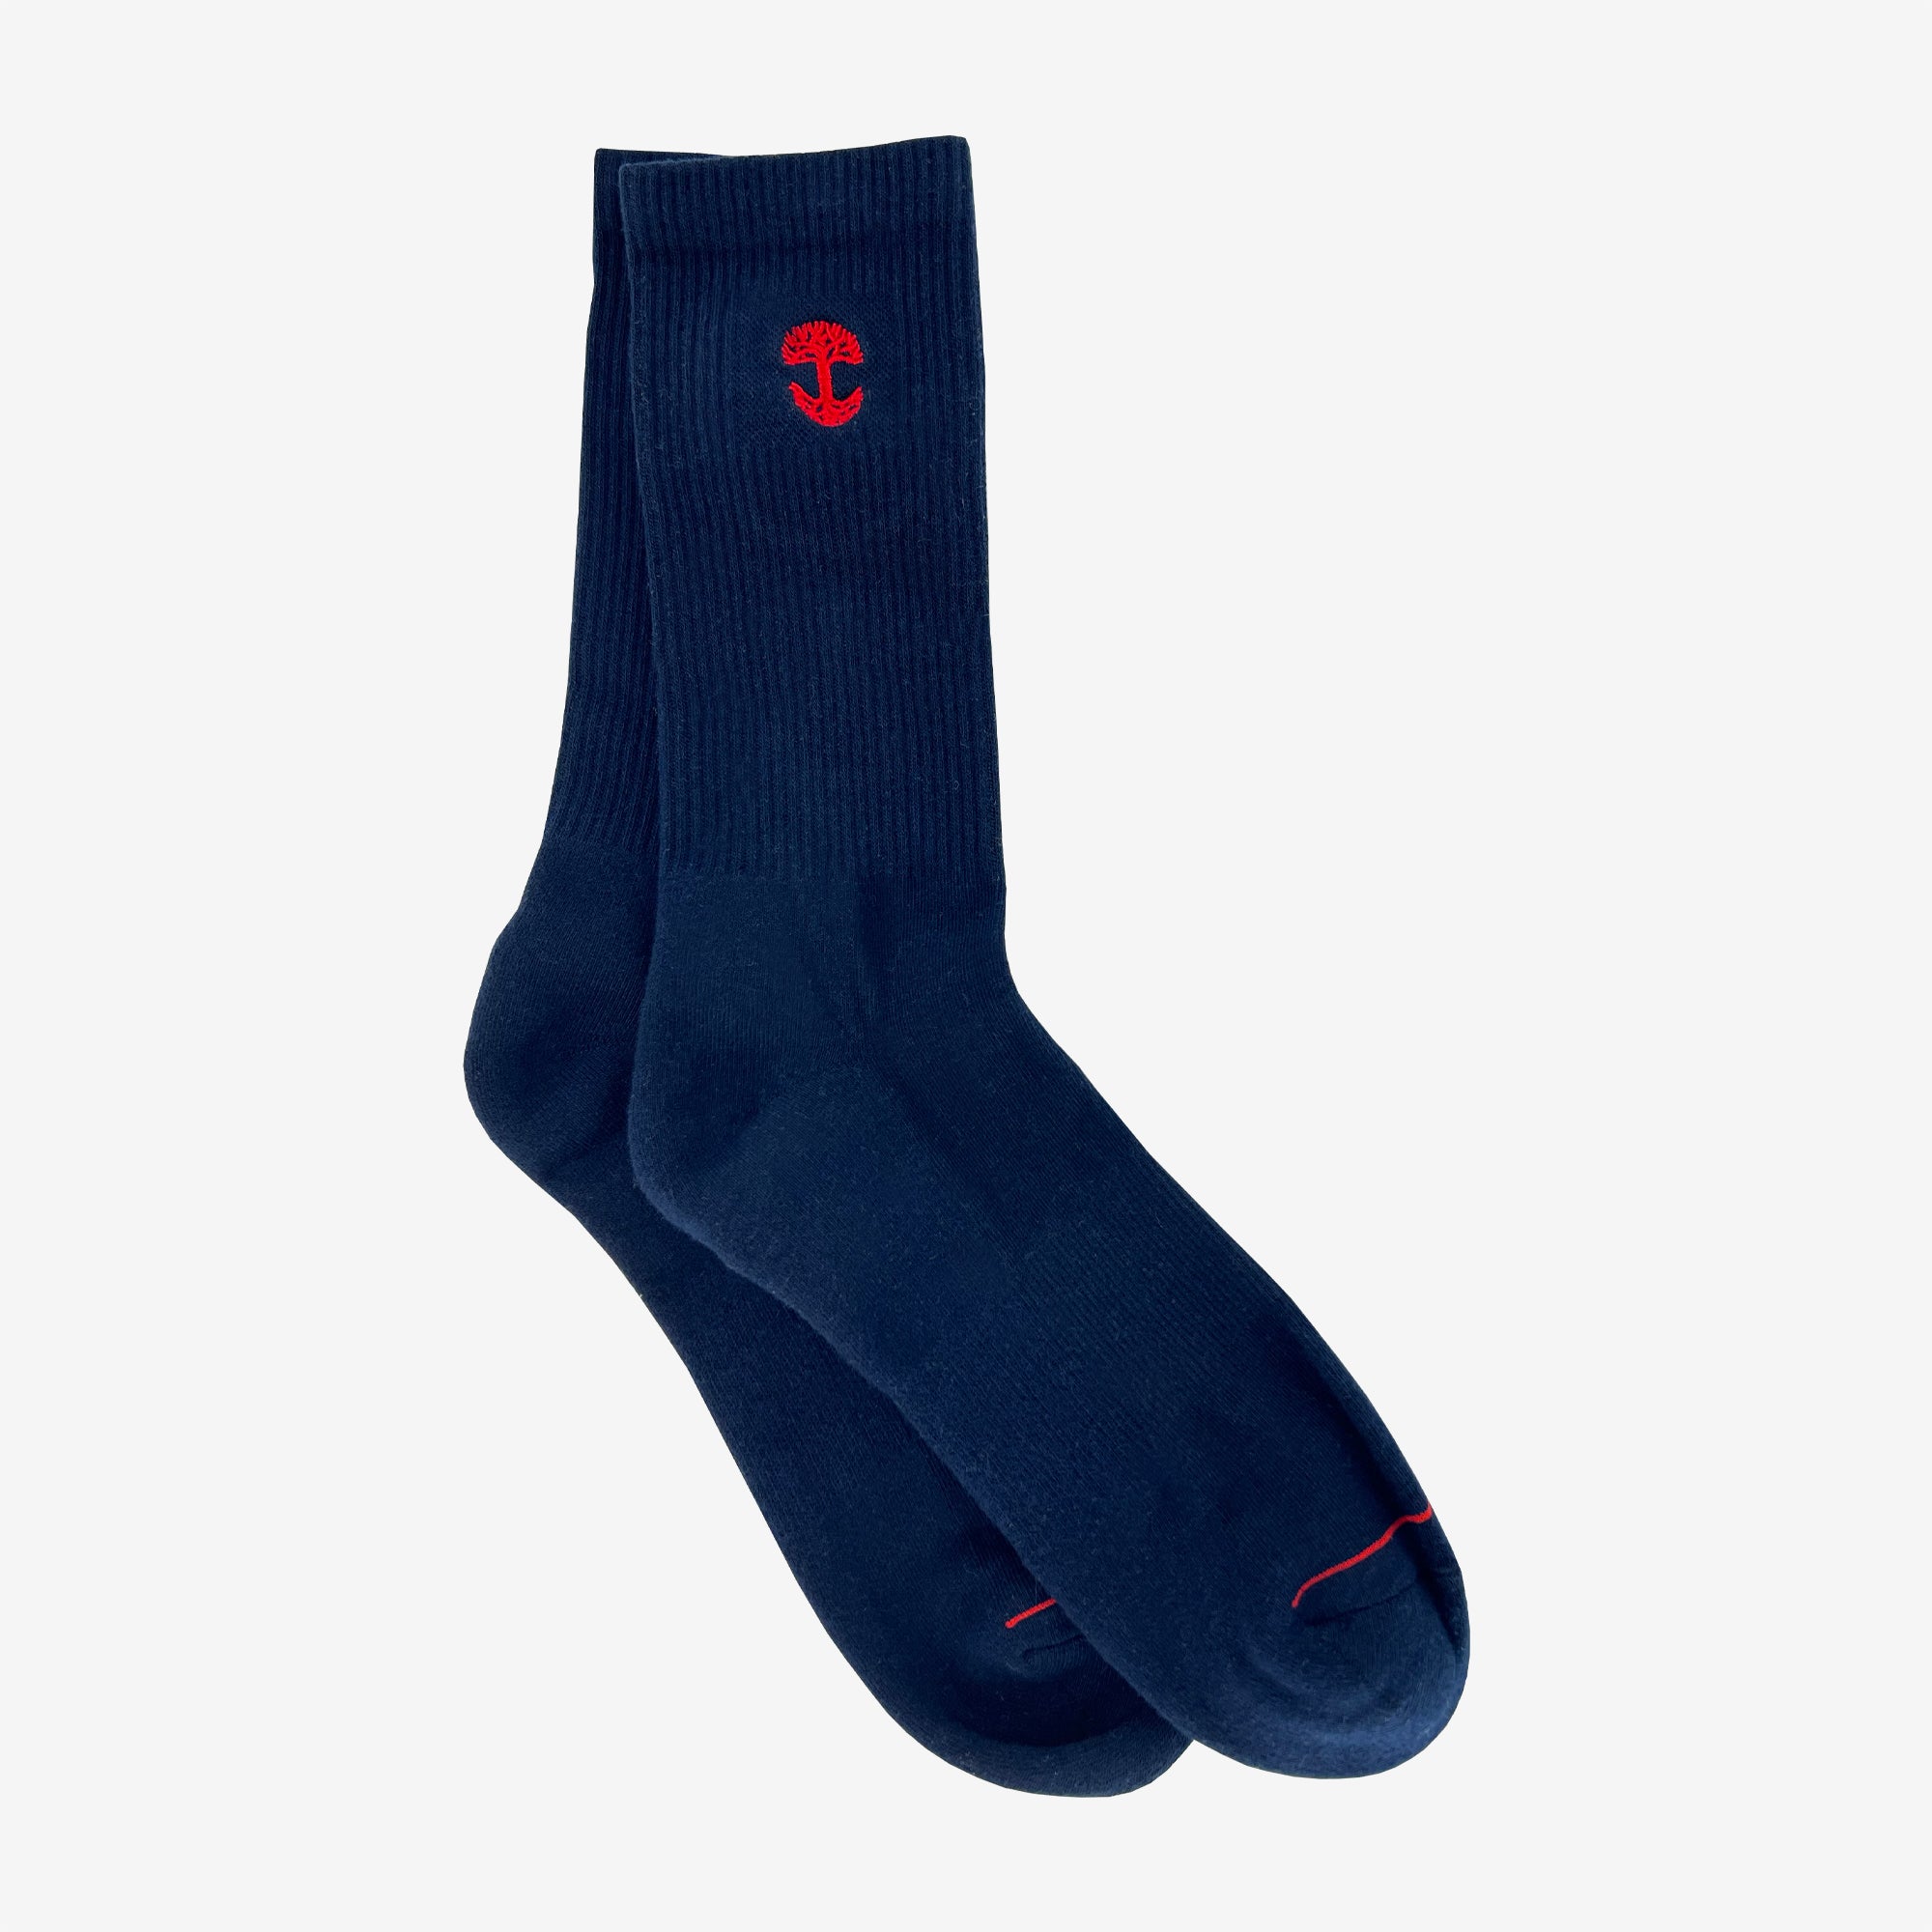 Two nestled high-cut navy crew socks with an embroidered red Oaklandish logo at the top.